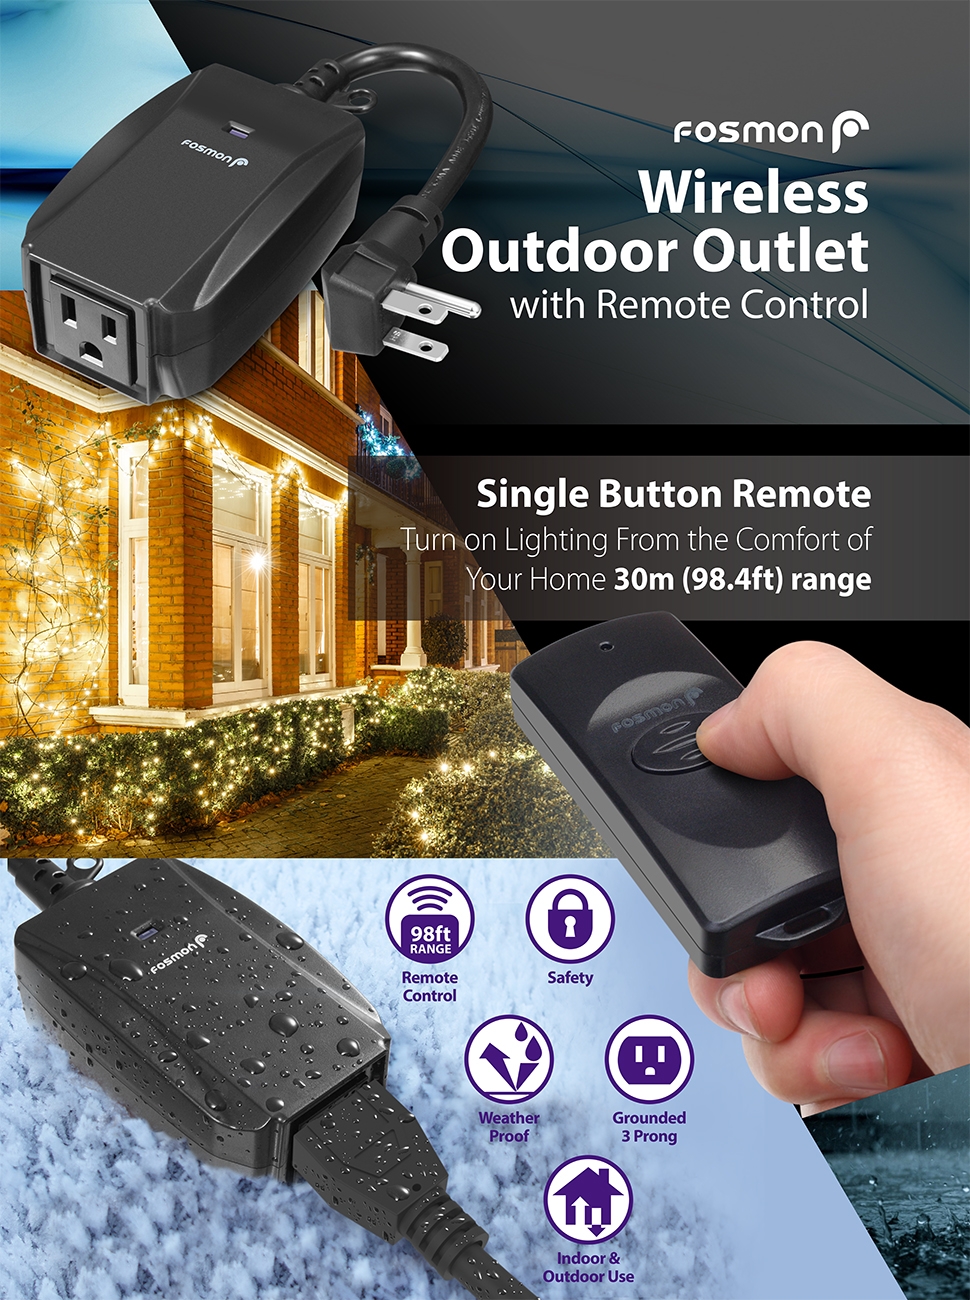 Fosmon Wireless Remote Control Outdoor Electrical Outlet Switch  Weatherproof Heavy Duty 3-Prong Plug-in ETL Listed (Battery Included), Black